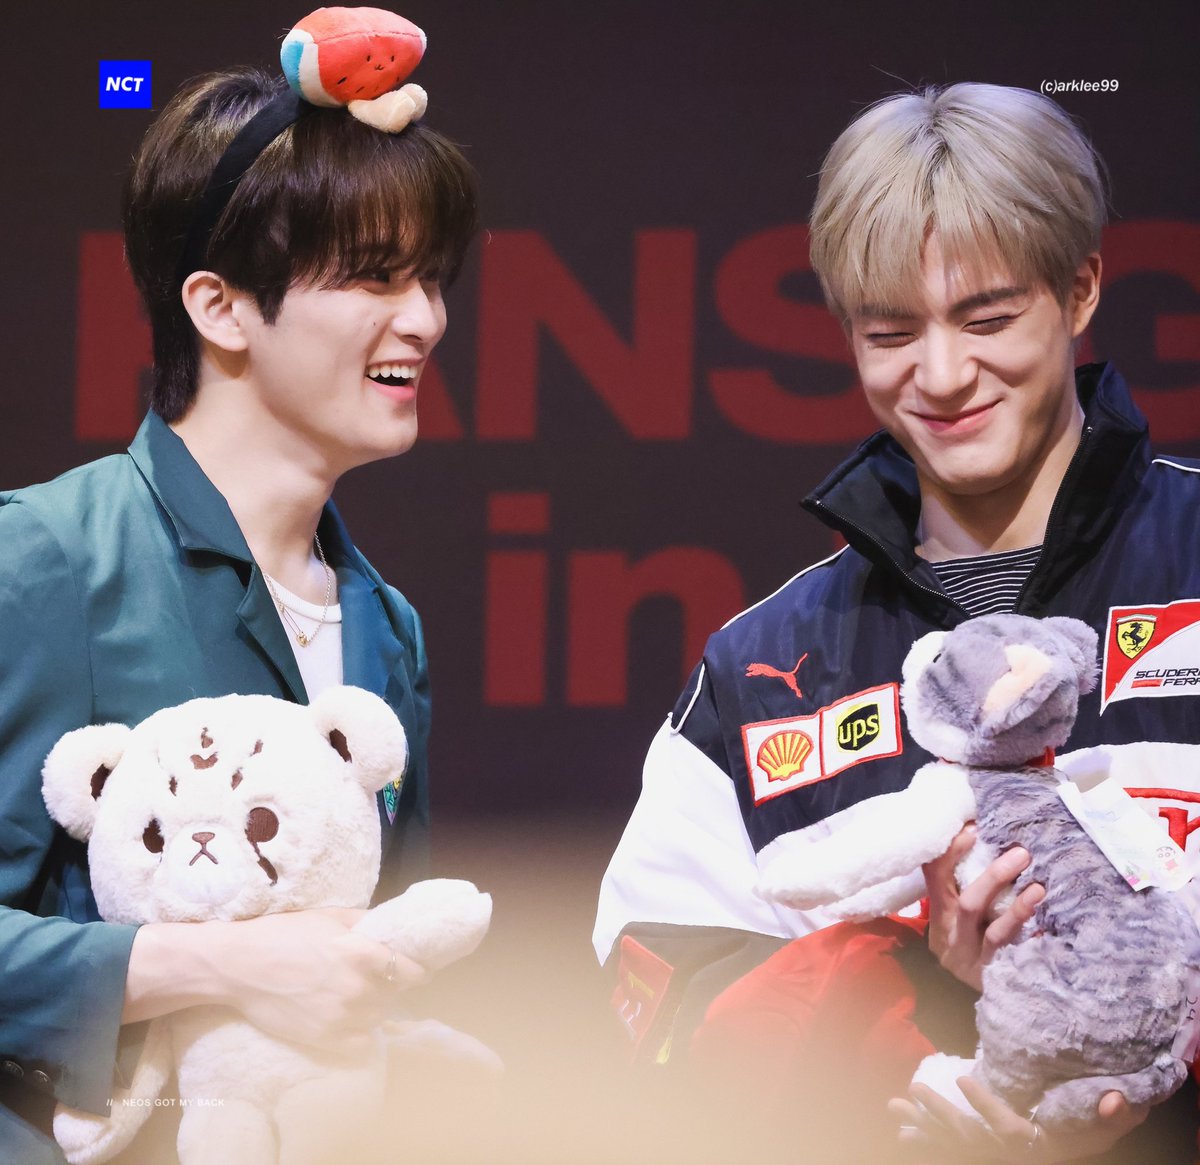 prettiest markno with their babies 🥺